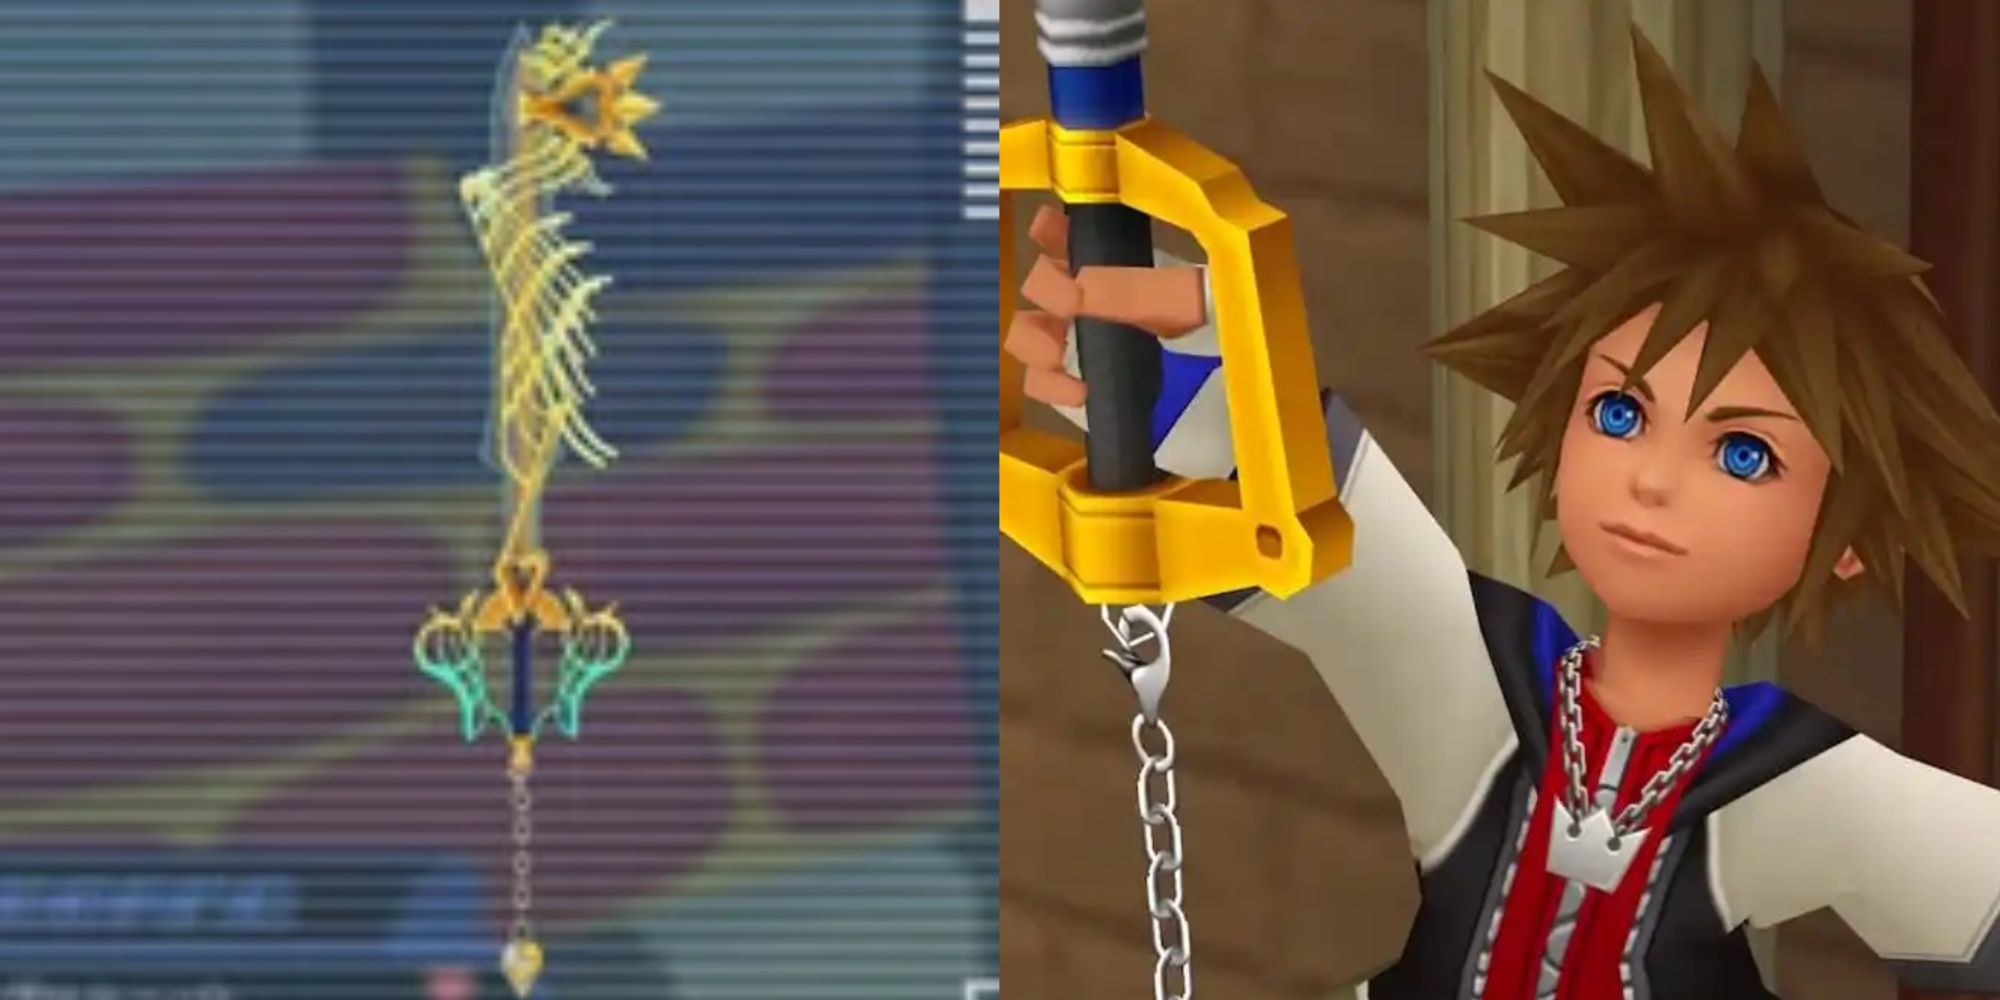 Split images of the Ultima Keyblade and Sora holding the Kingdom Key Keyblade in Kingdom Hearts